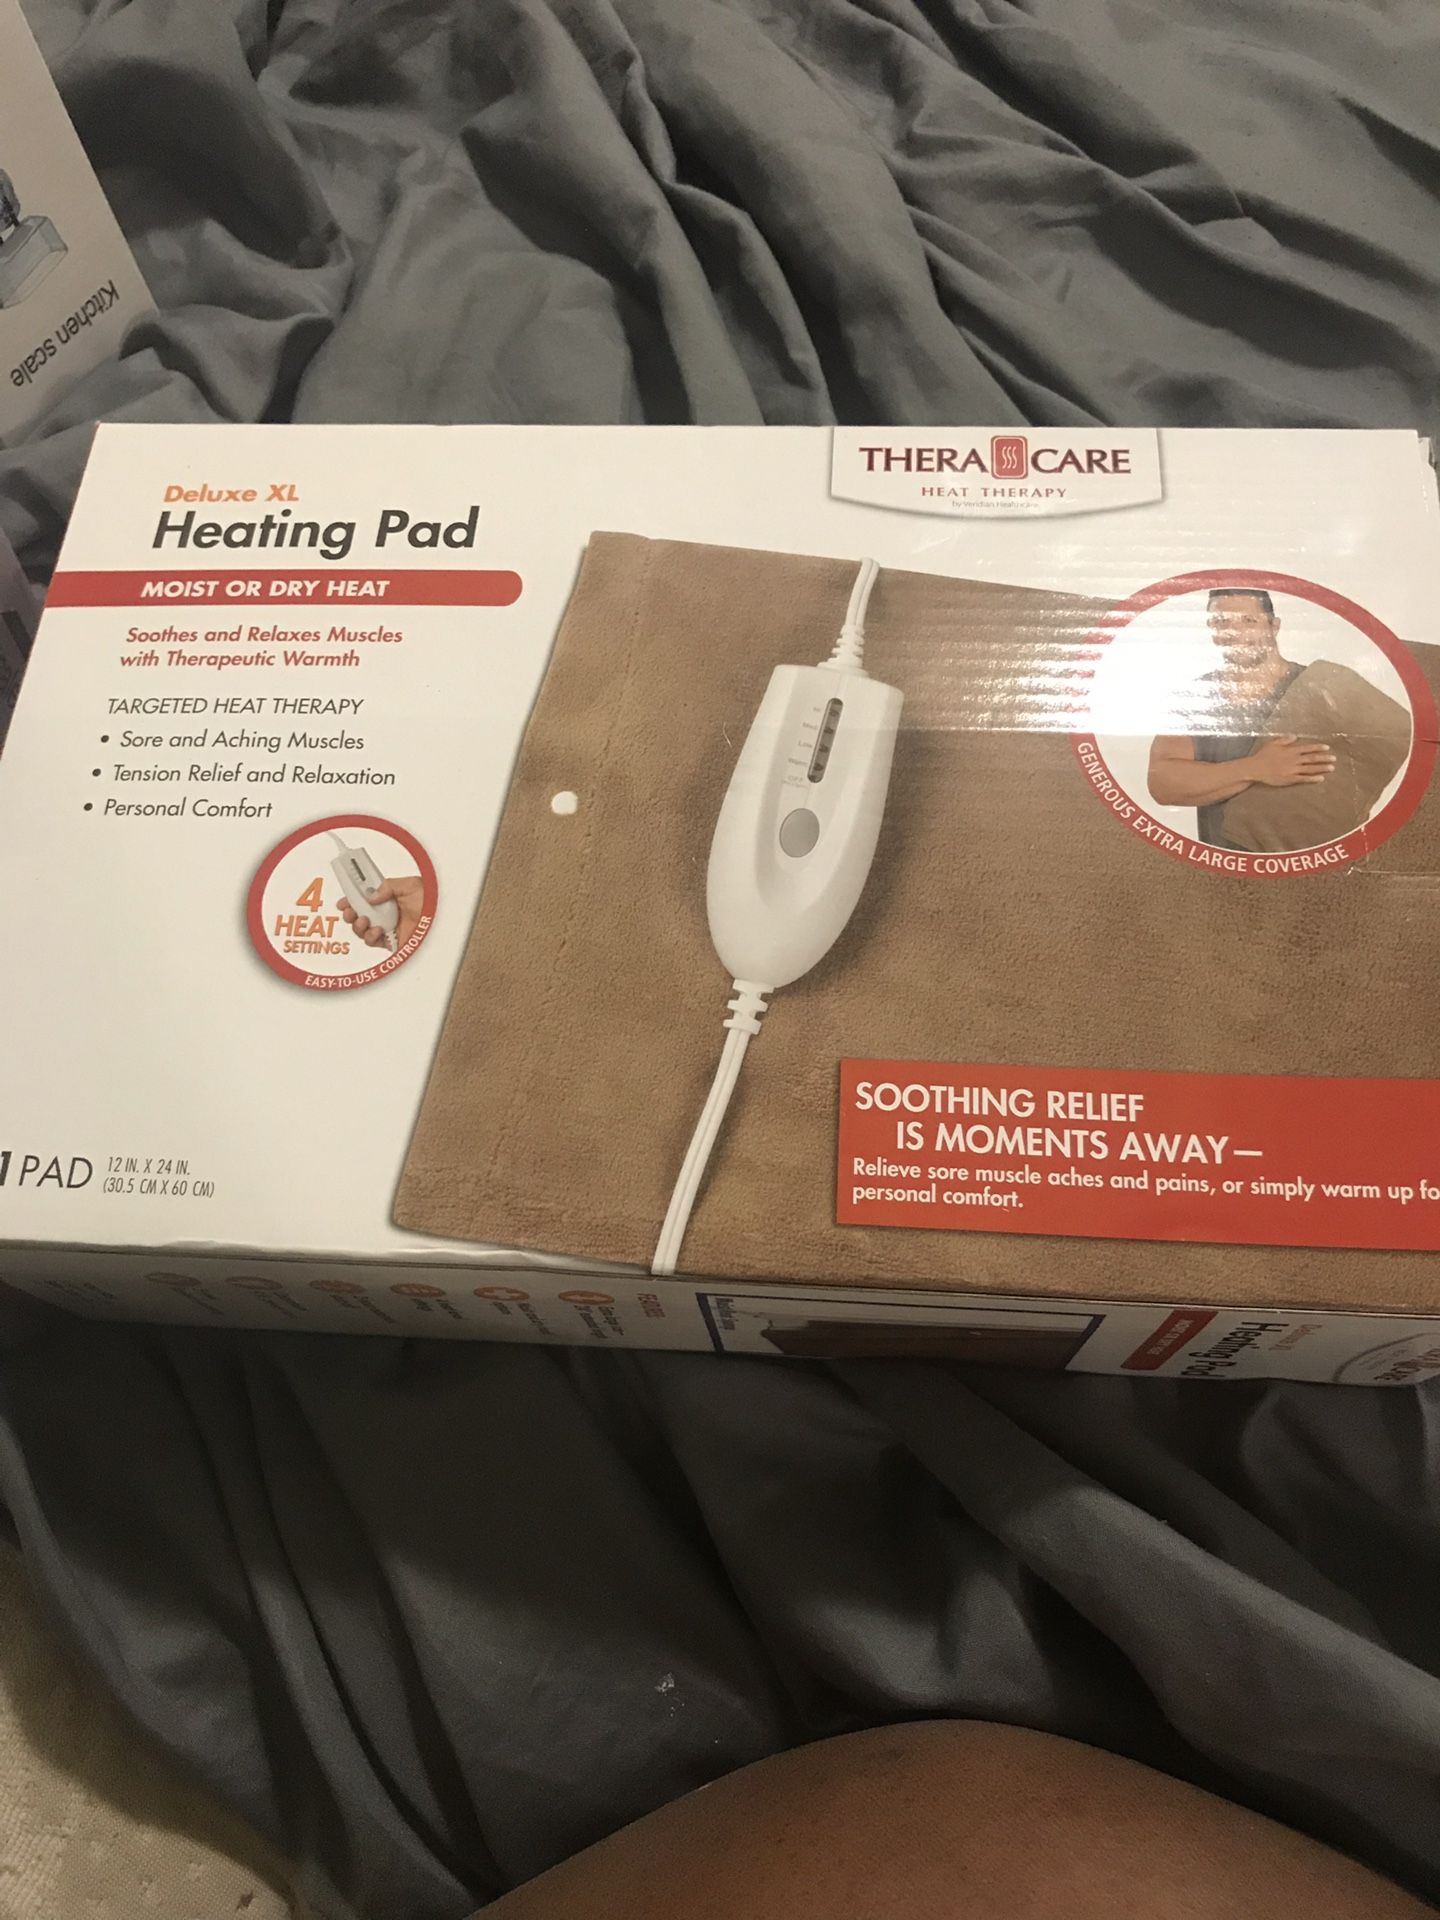 Kitchen scale and the heating pad Exter large deluxe